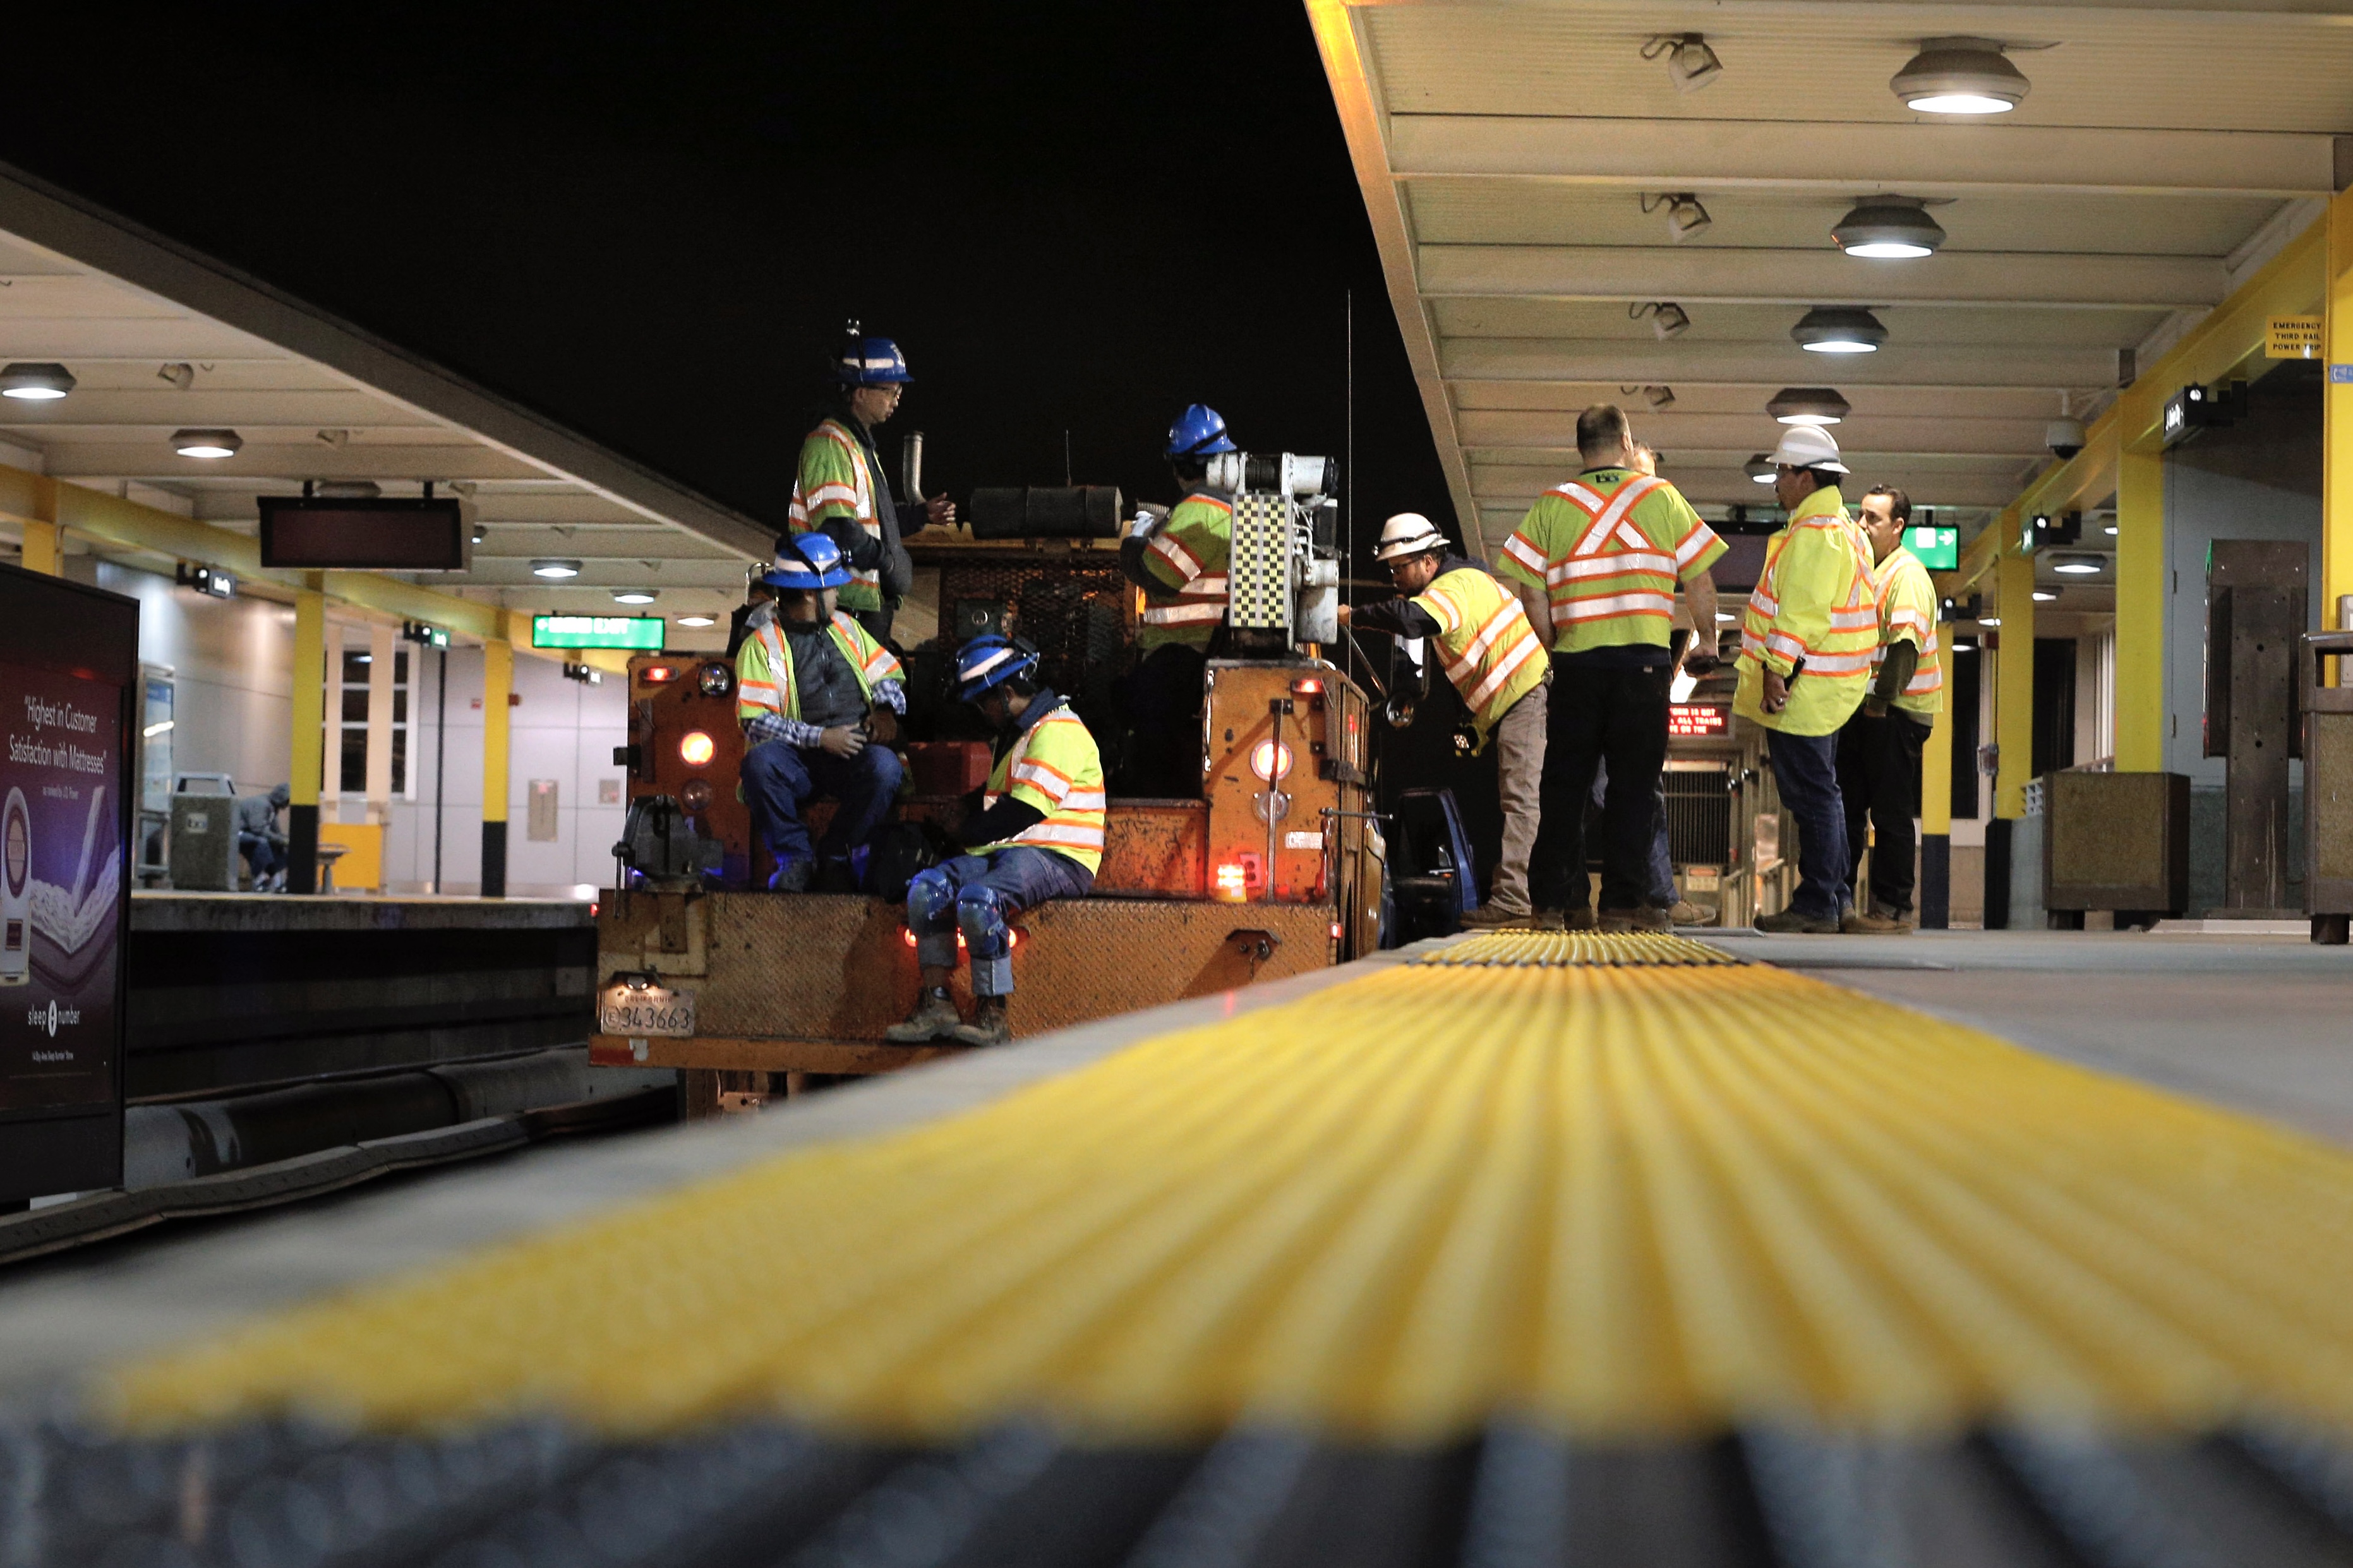 The image shows a group of construction workers in reflective vests and hard hats, both standing and seated, on a subway platform at night, inspecting equipment.